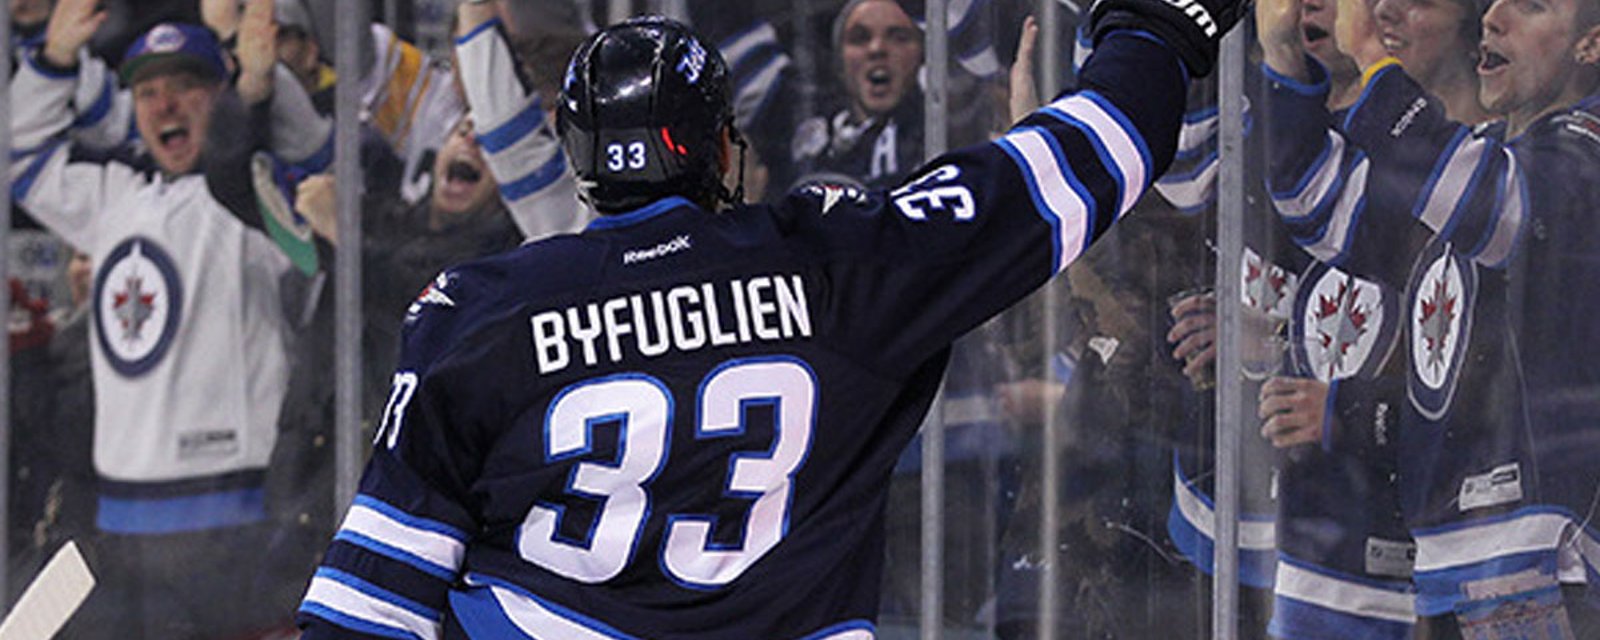 Breaking: Bad news for Byfuglien and Jets 